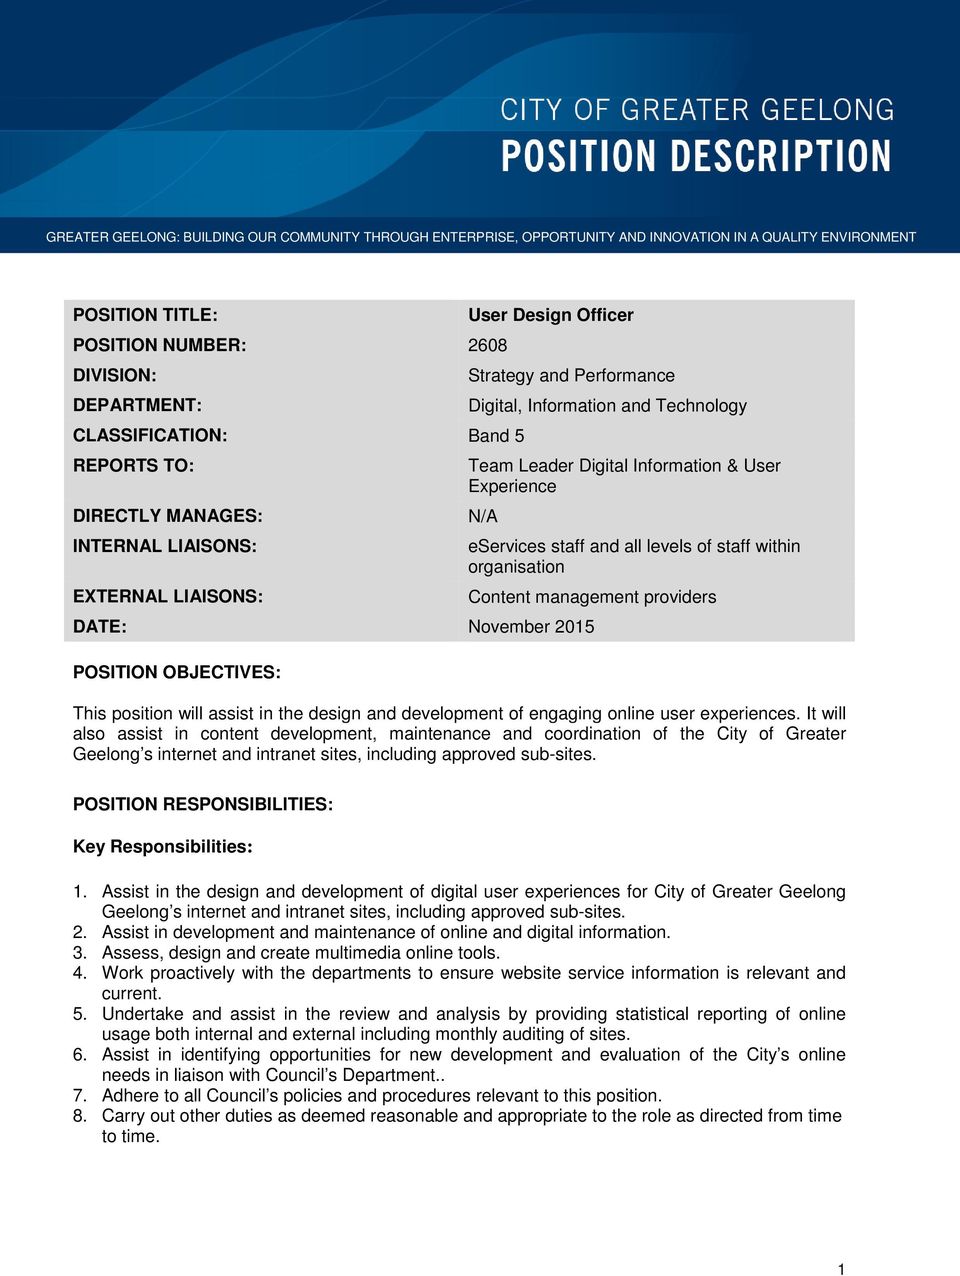 N/A eservices staff and all levels of staff within organisation Content management providers DATE: November 2015 POSITION OBJECTIVES: This position will assist in the design and development of